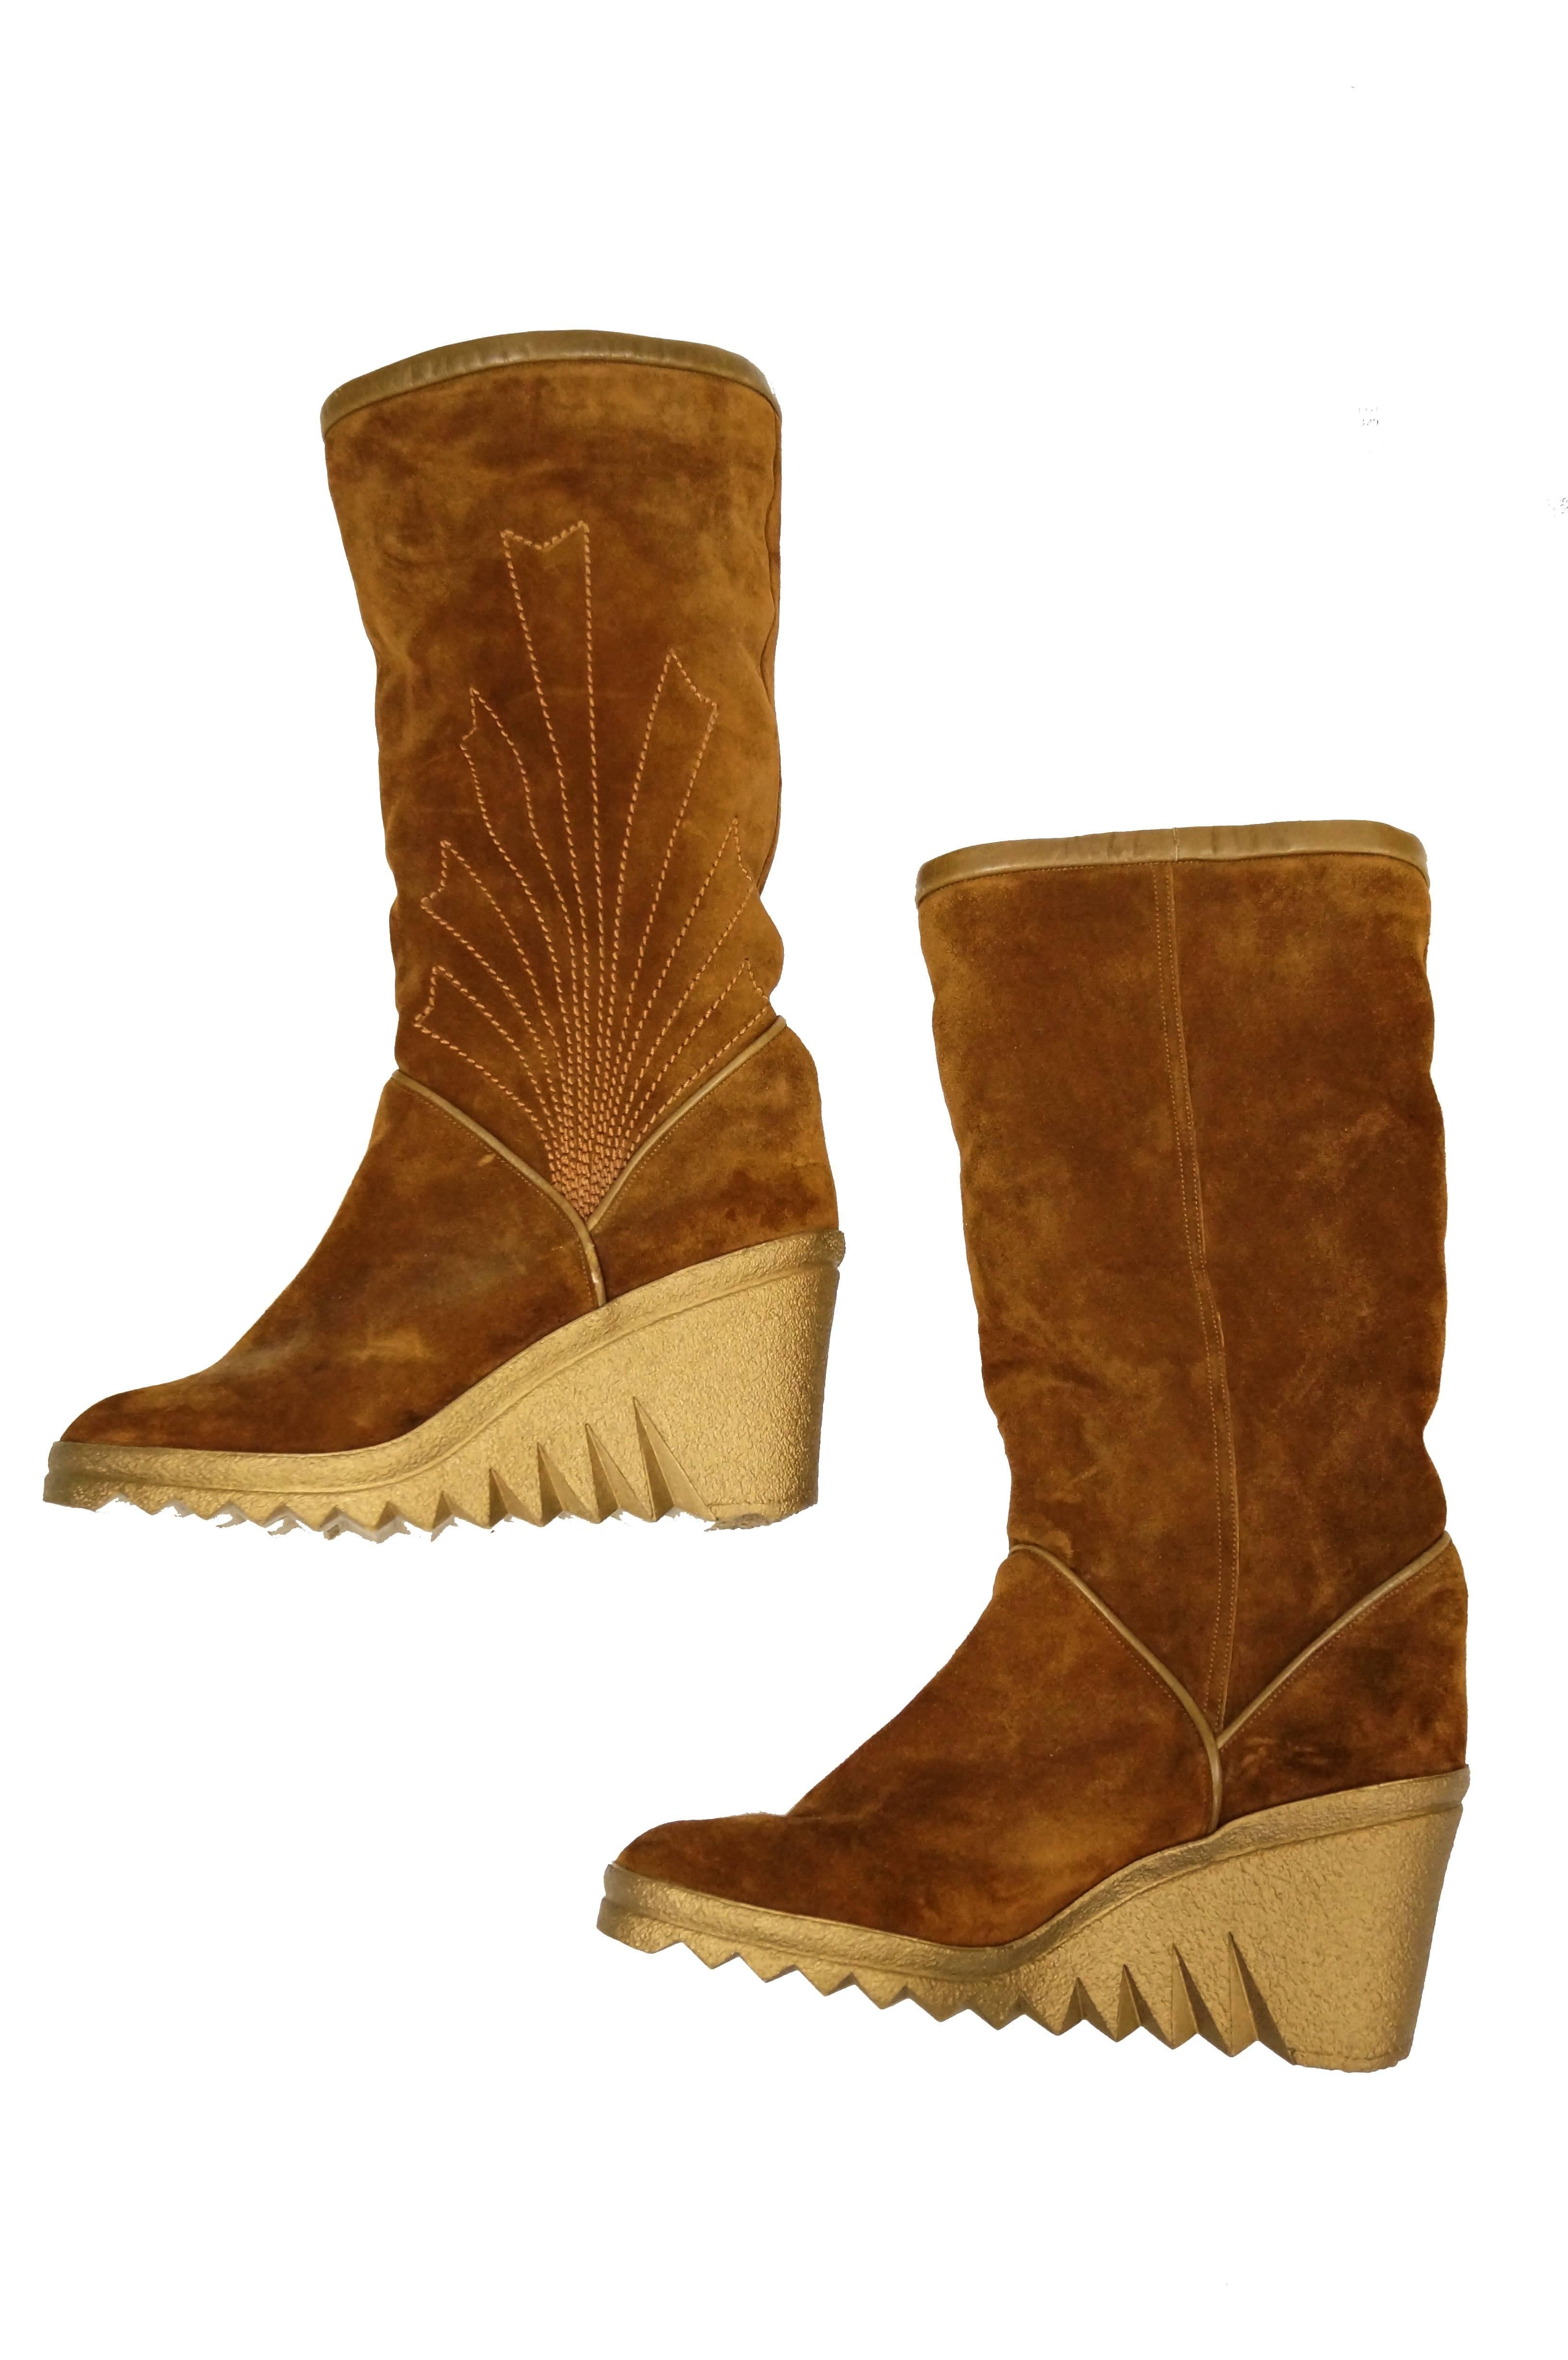 Wedge boots by Charles Jourdan featuring chestnut brown suede and natural rubber heels. The boots have a tall zig - zag tread, olive brown trim at the top, and a wonderful sunrise - like stitch detail on the outer panels. Climb a mountain - or climb